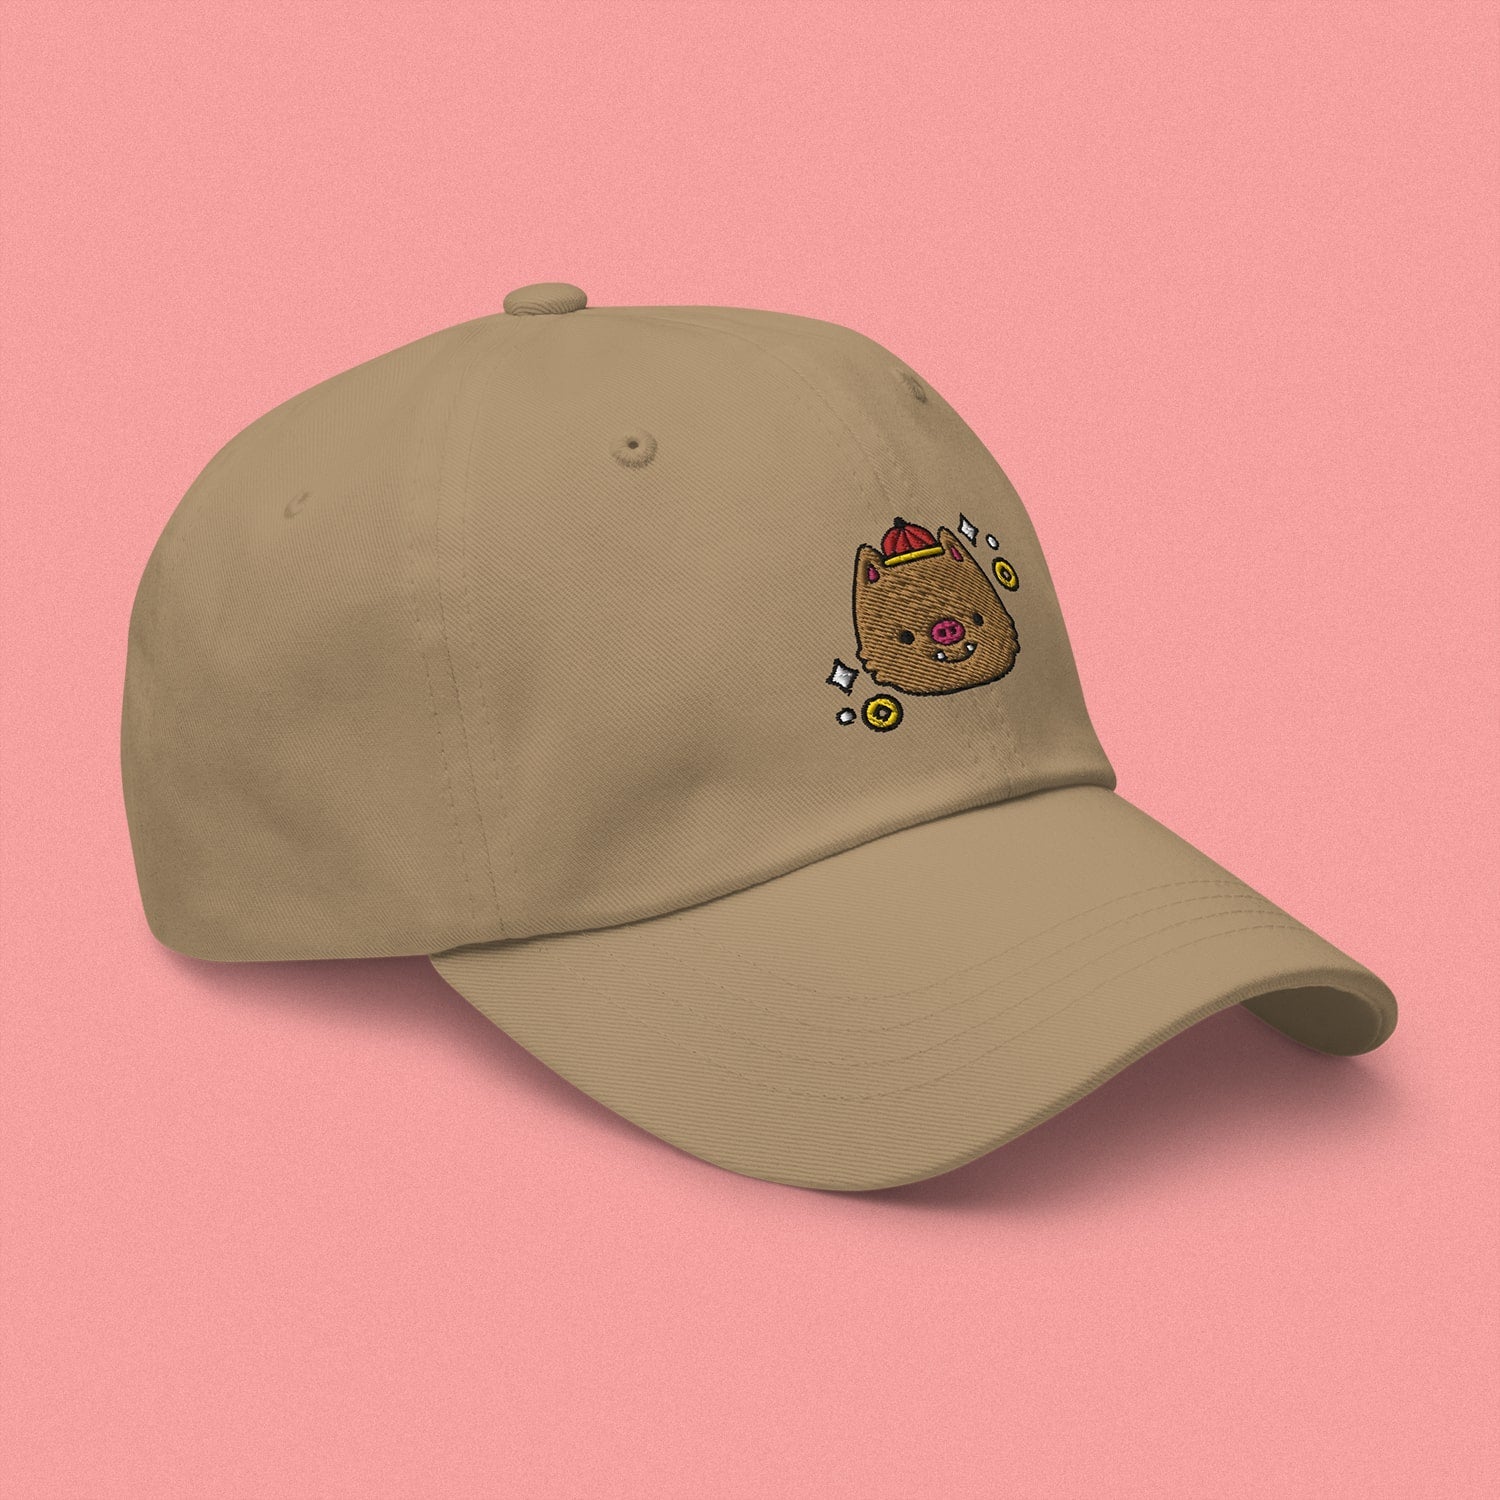 Year of the Pig Embroidered Cap - Ni De Mama Chinese Clothing